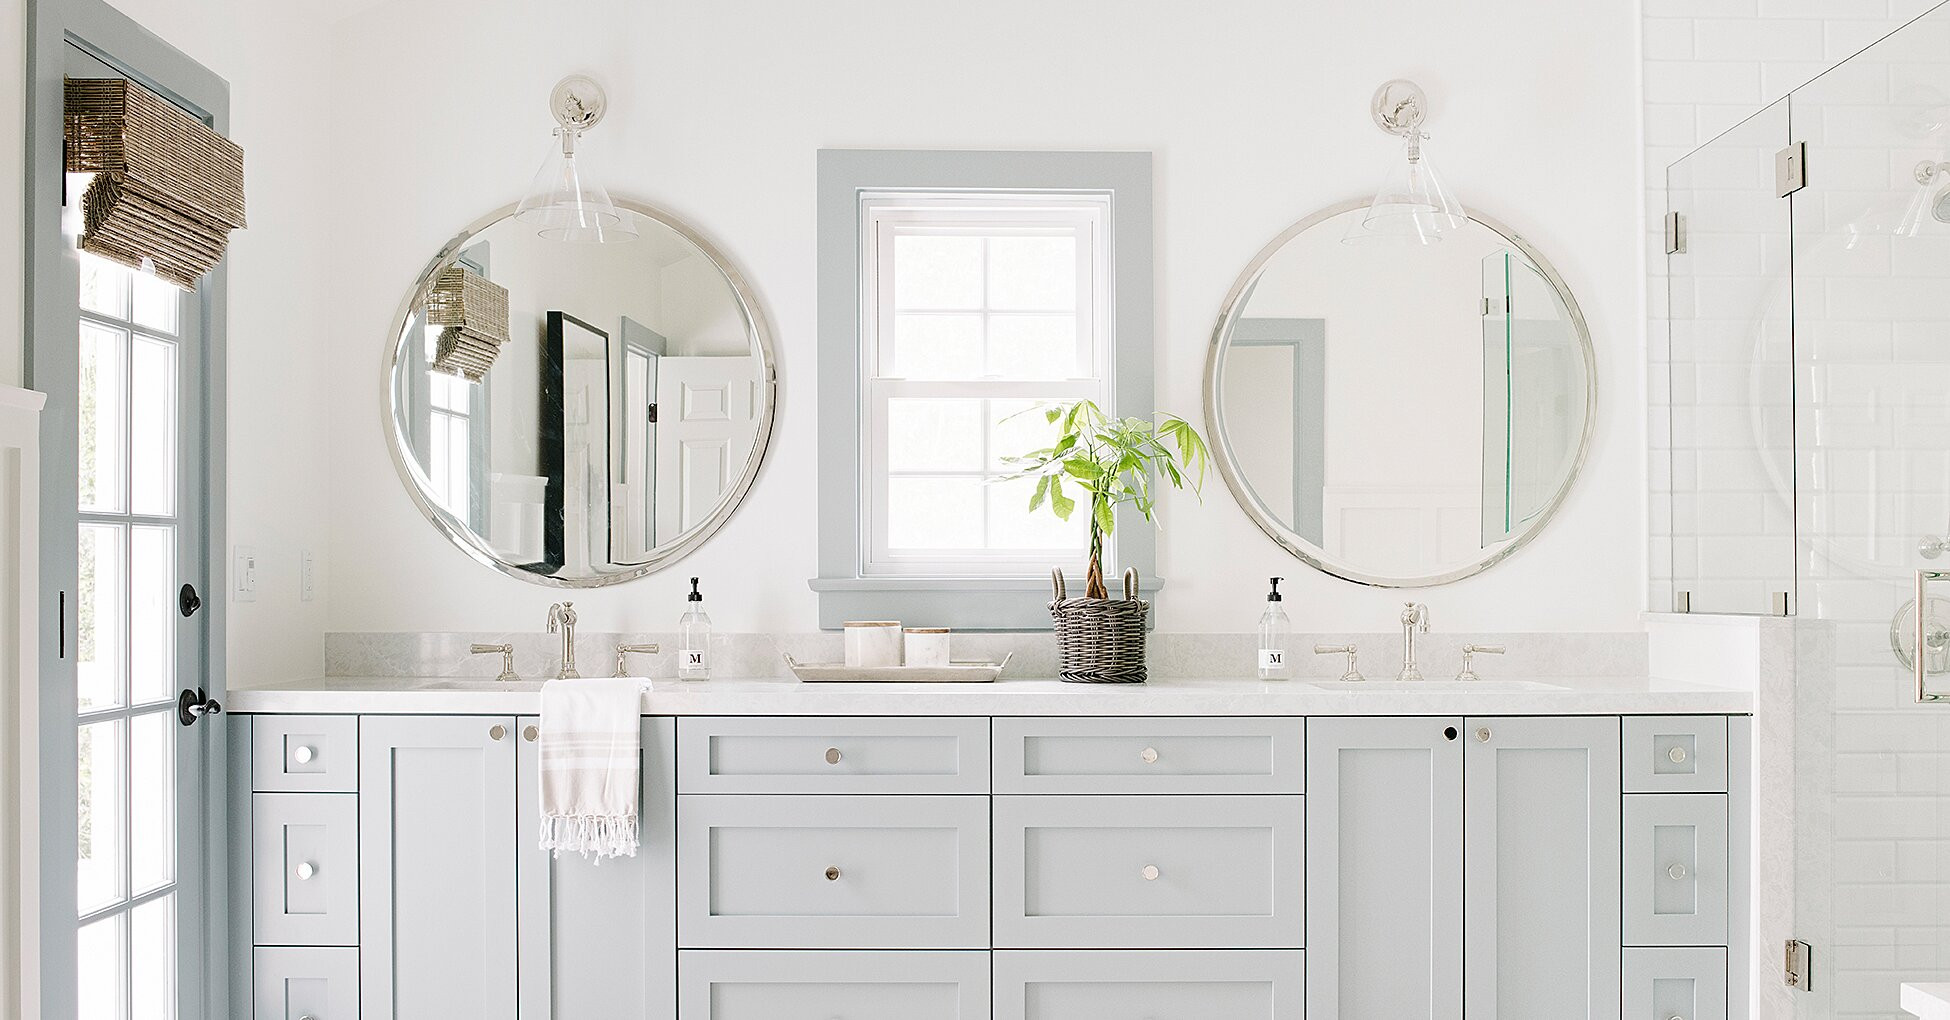 Bathroom Colors 2020
 These Are the Most Popular Bathroom Paint Colors for 2020